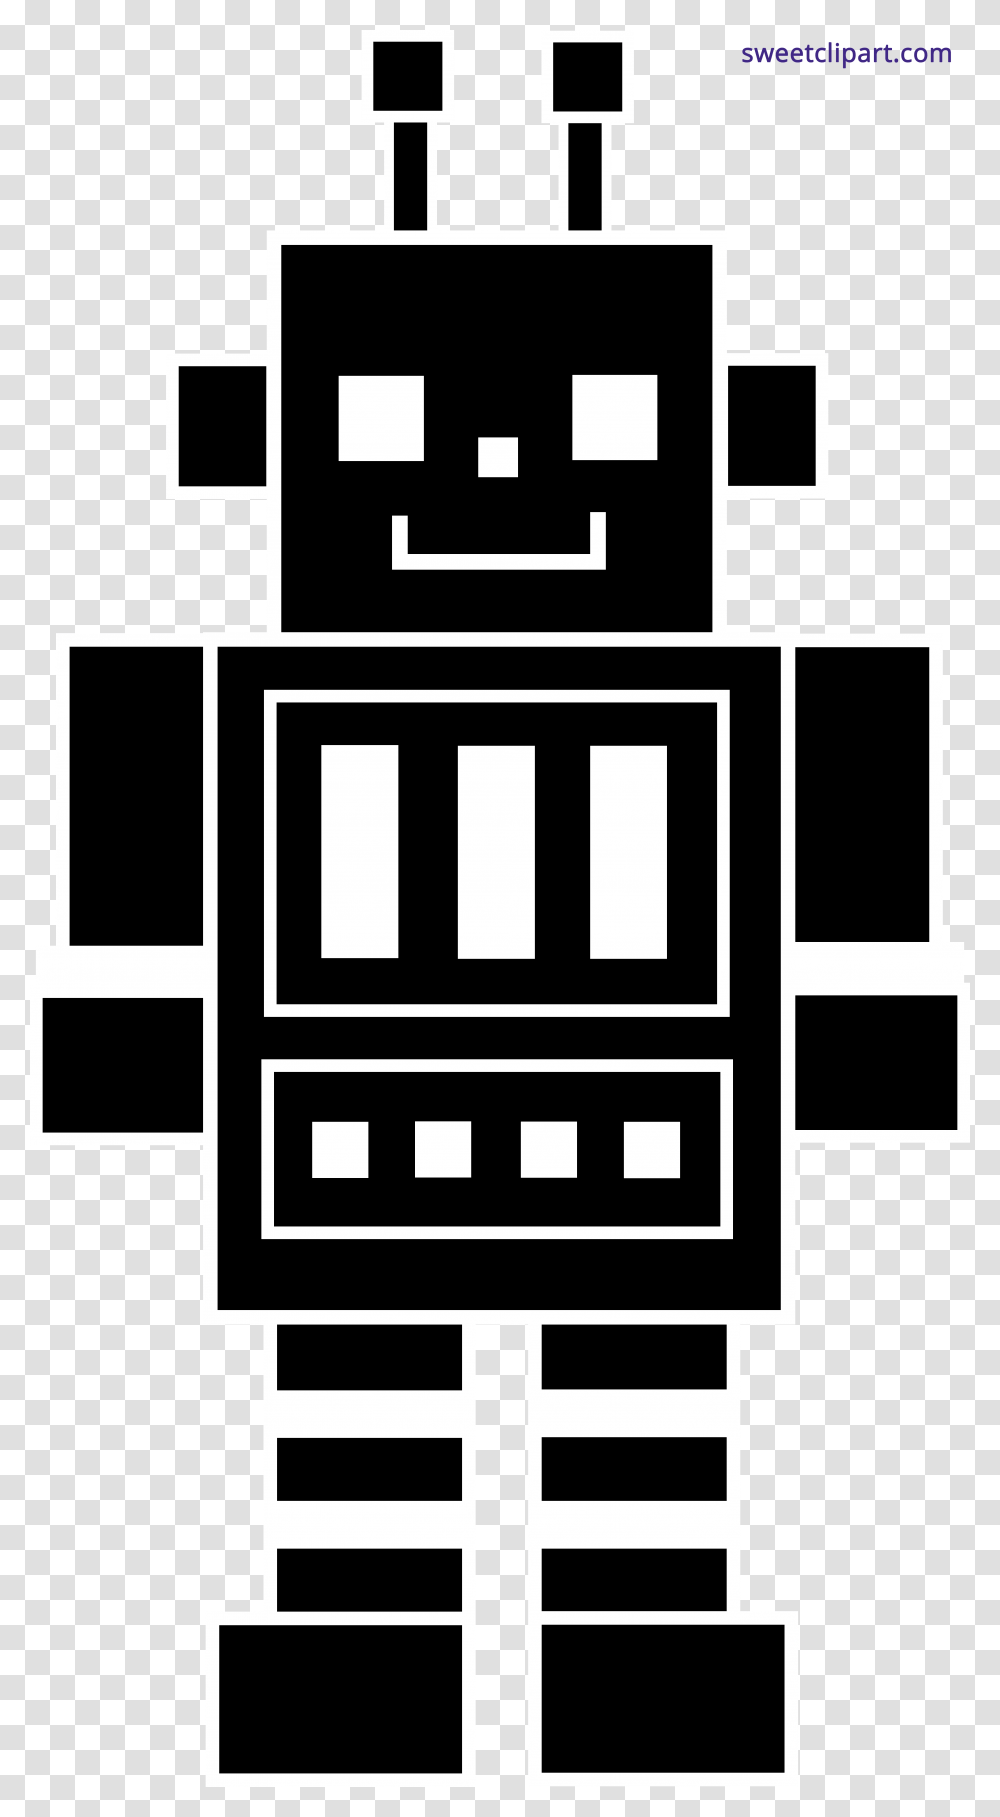 Facebook Clipart Black And White Black And White Robot Clipart, Stencil, Rug, Label Transparent Png